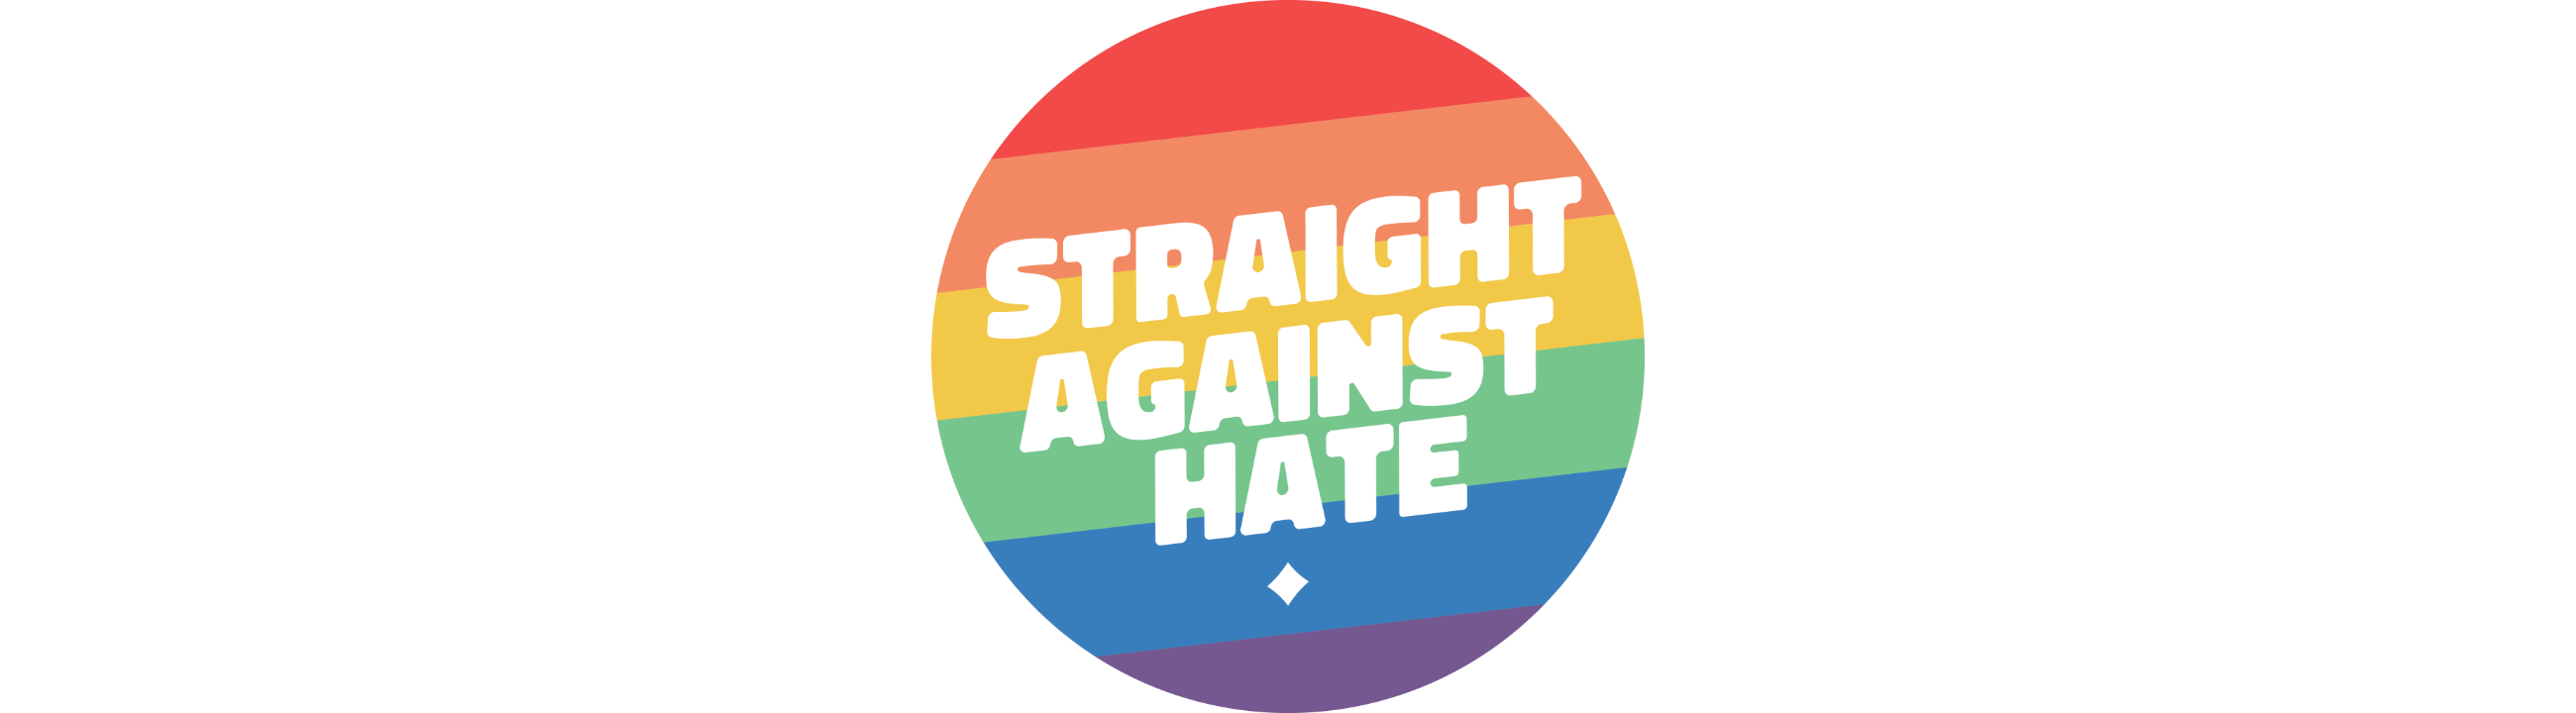 Straight Against Hate Badge